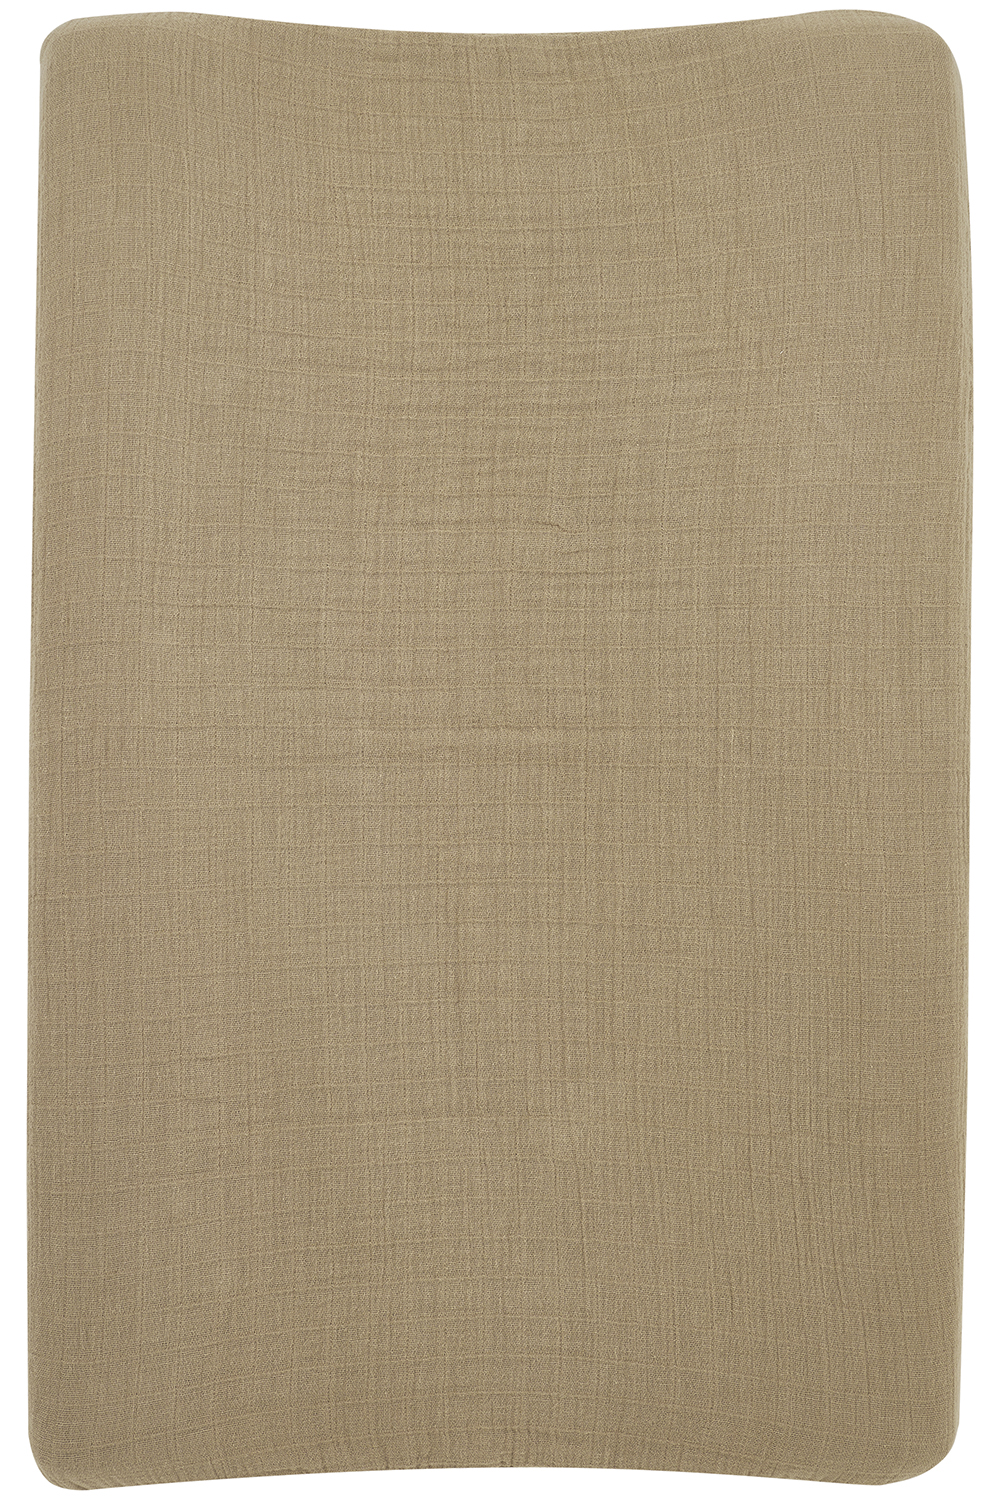 Changing mat cover pre-washed muslin Uni - taupe - 50x70cm